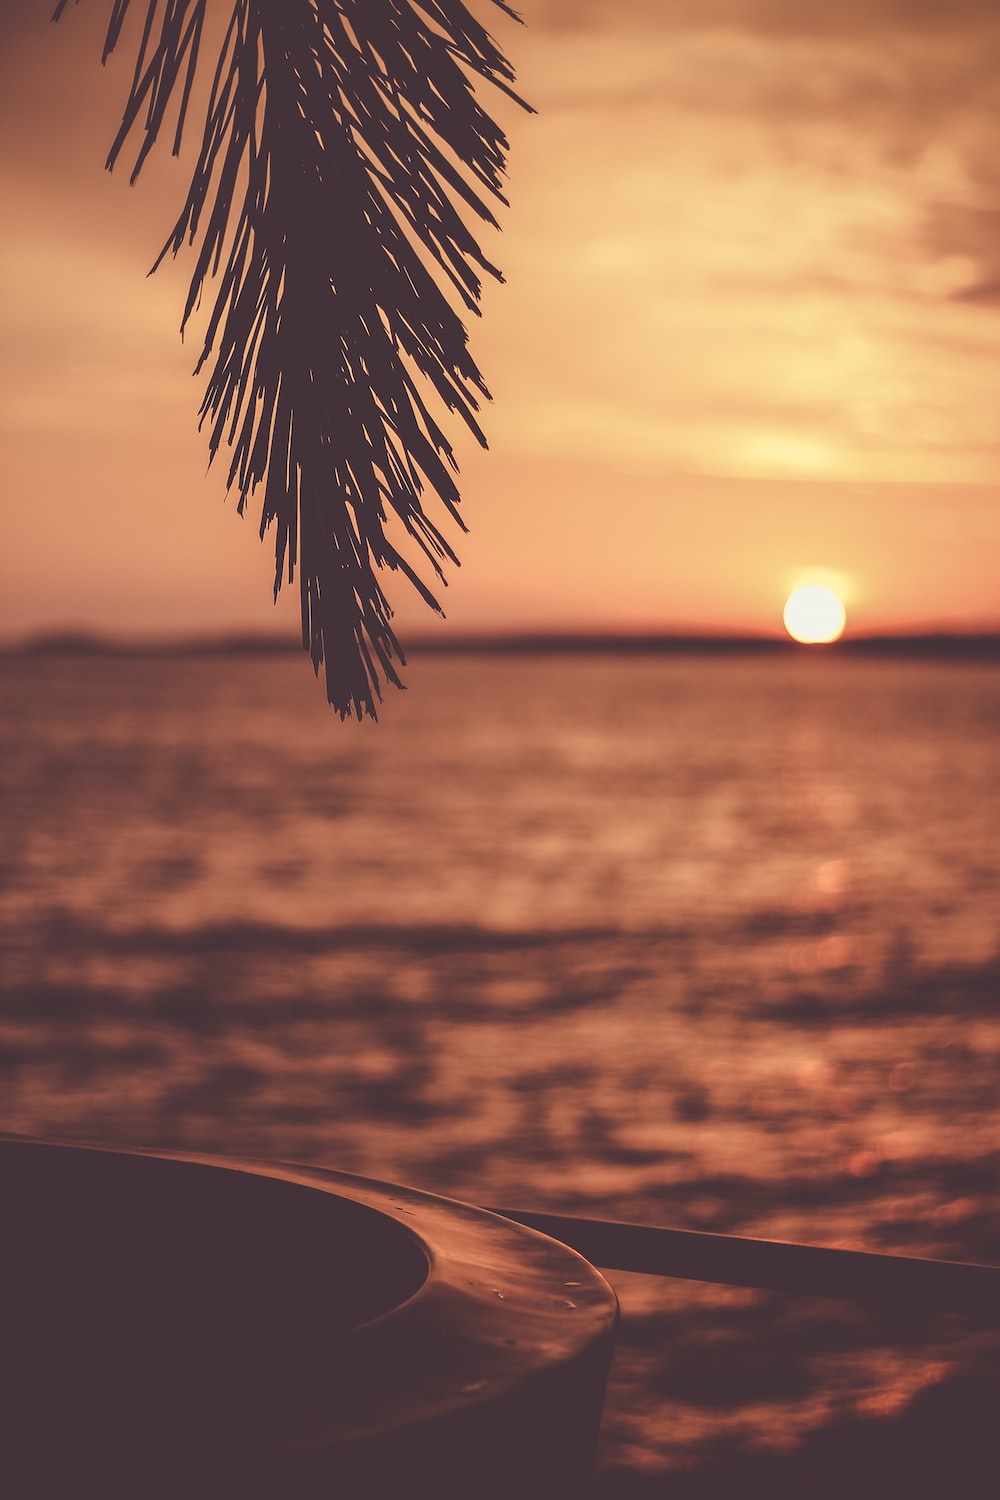 Sunset wallpapers free hd download hq